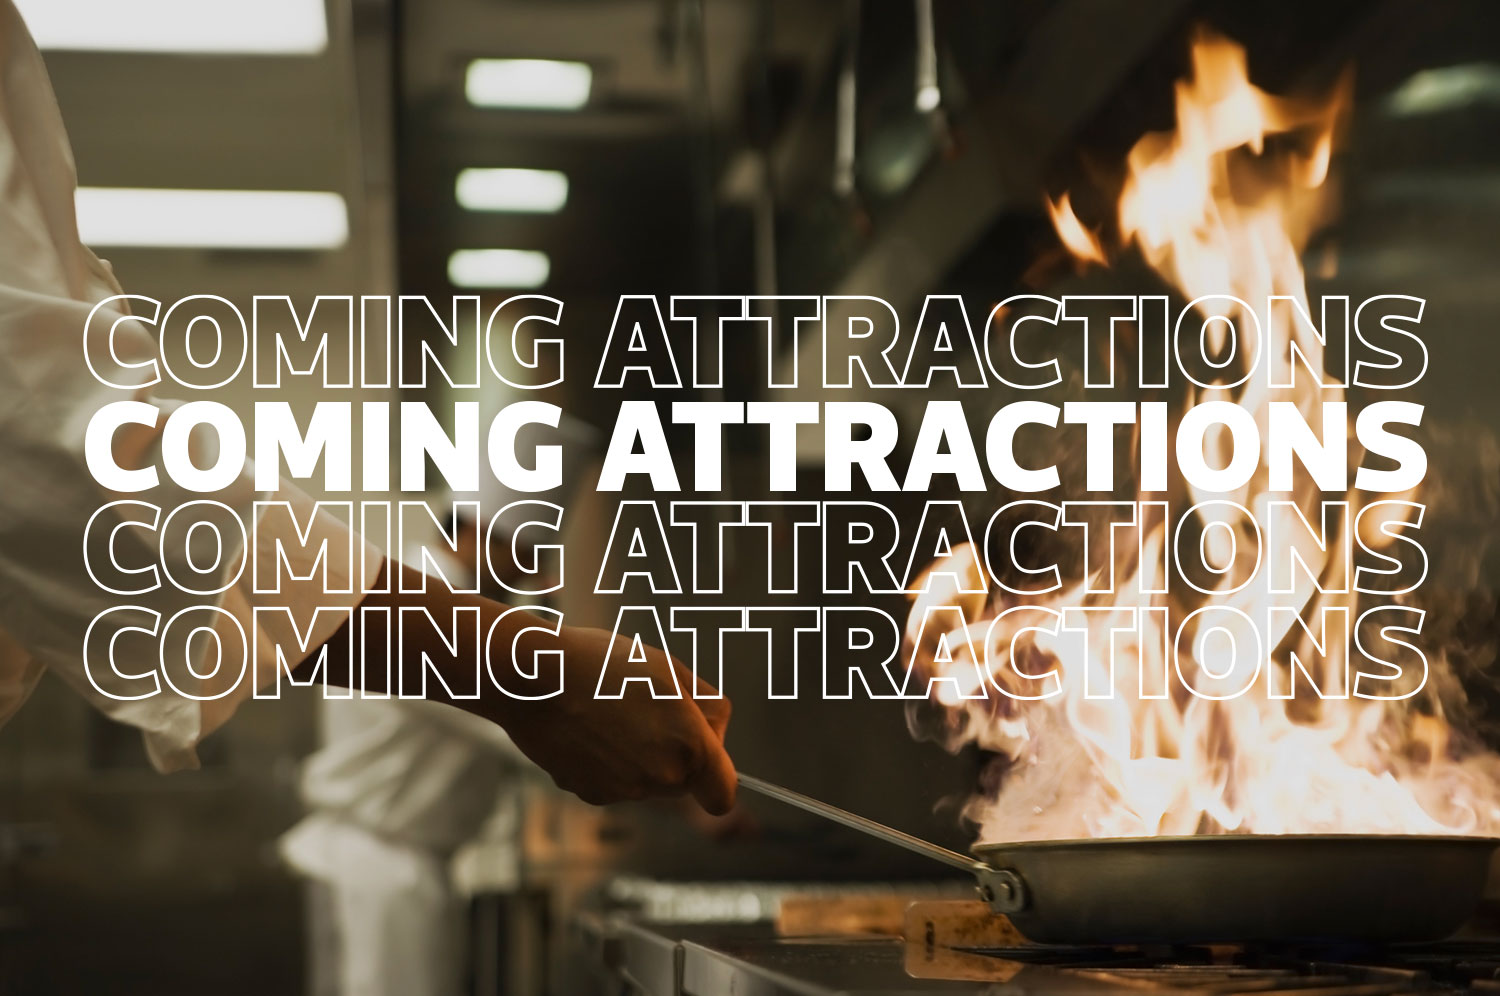 Text saying “Coming Attractions” with a chef holding a flaming skillet on a stove in the background